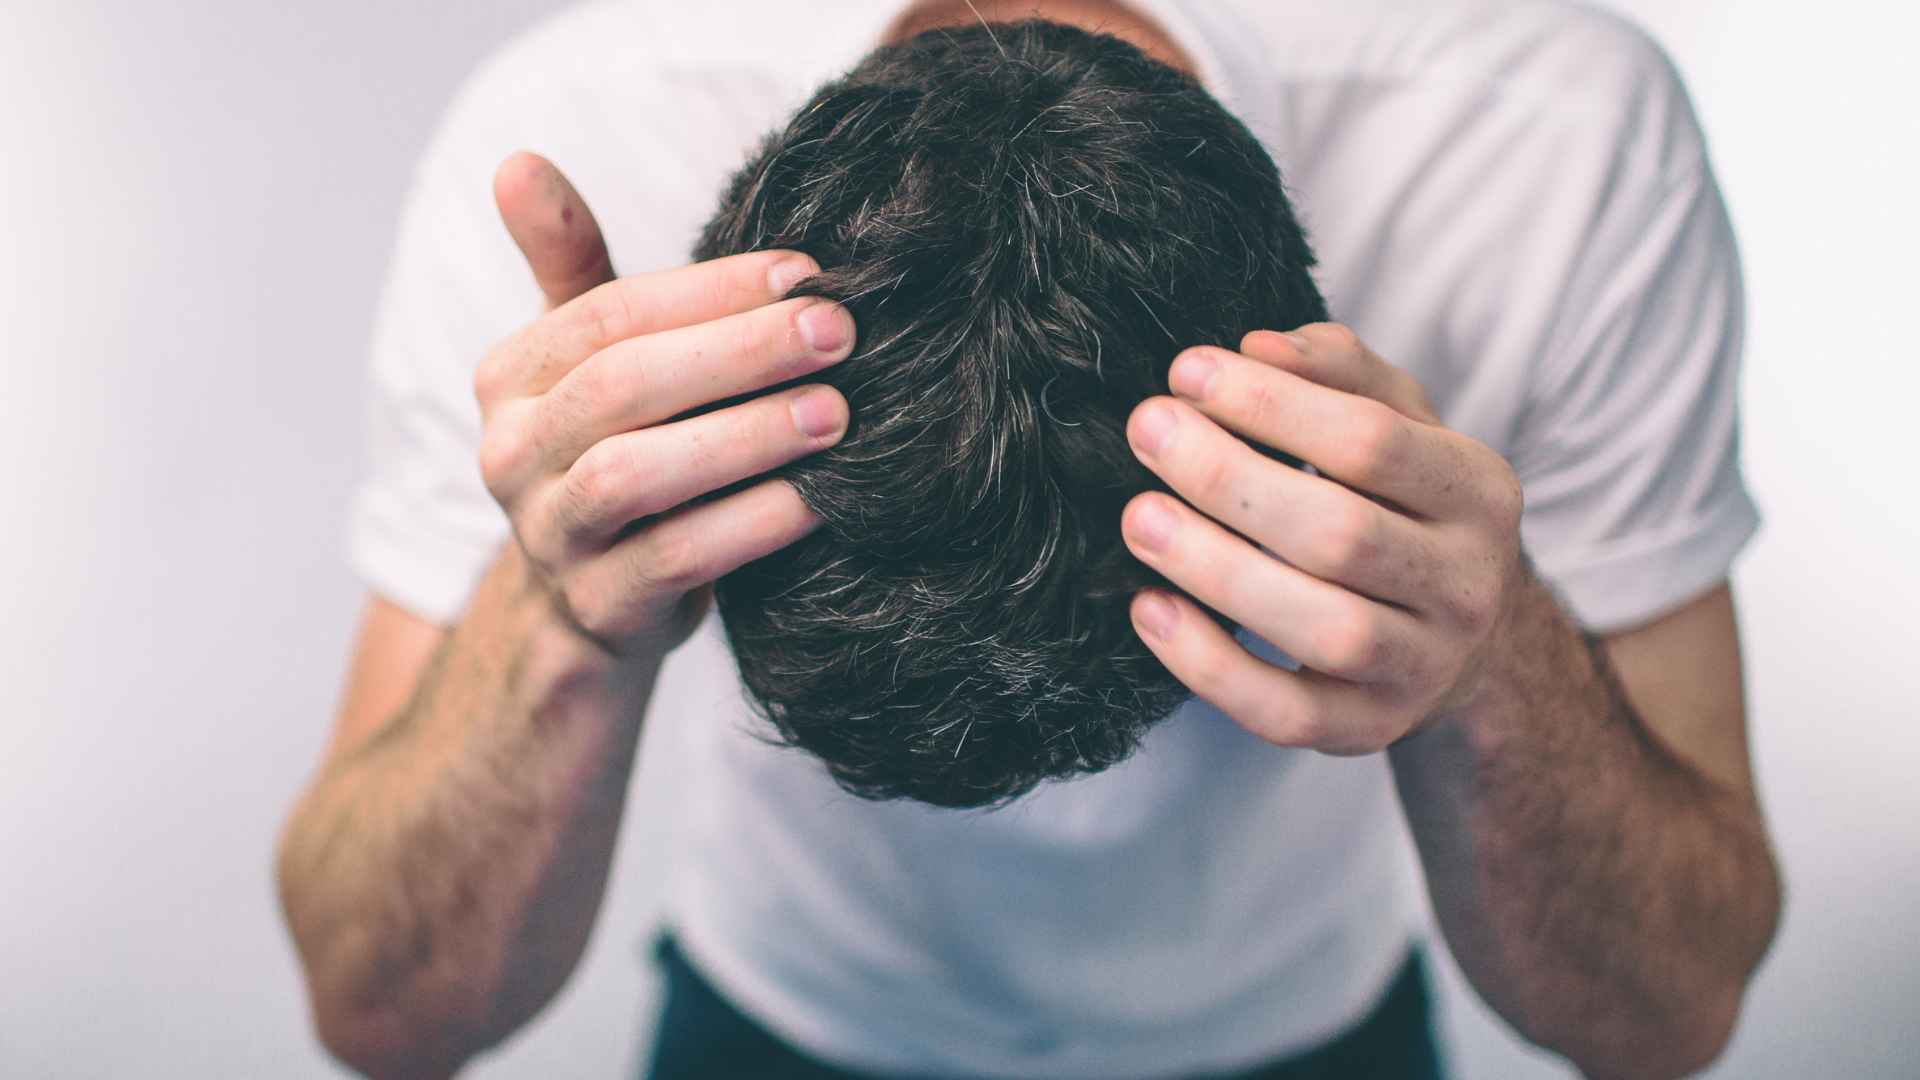 Does Pre-Workout Supplements Cause Hair Loss